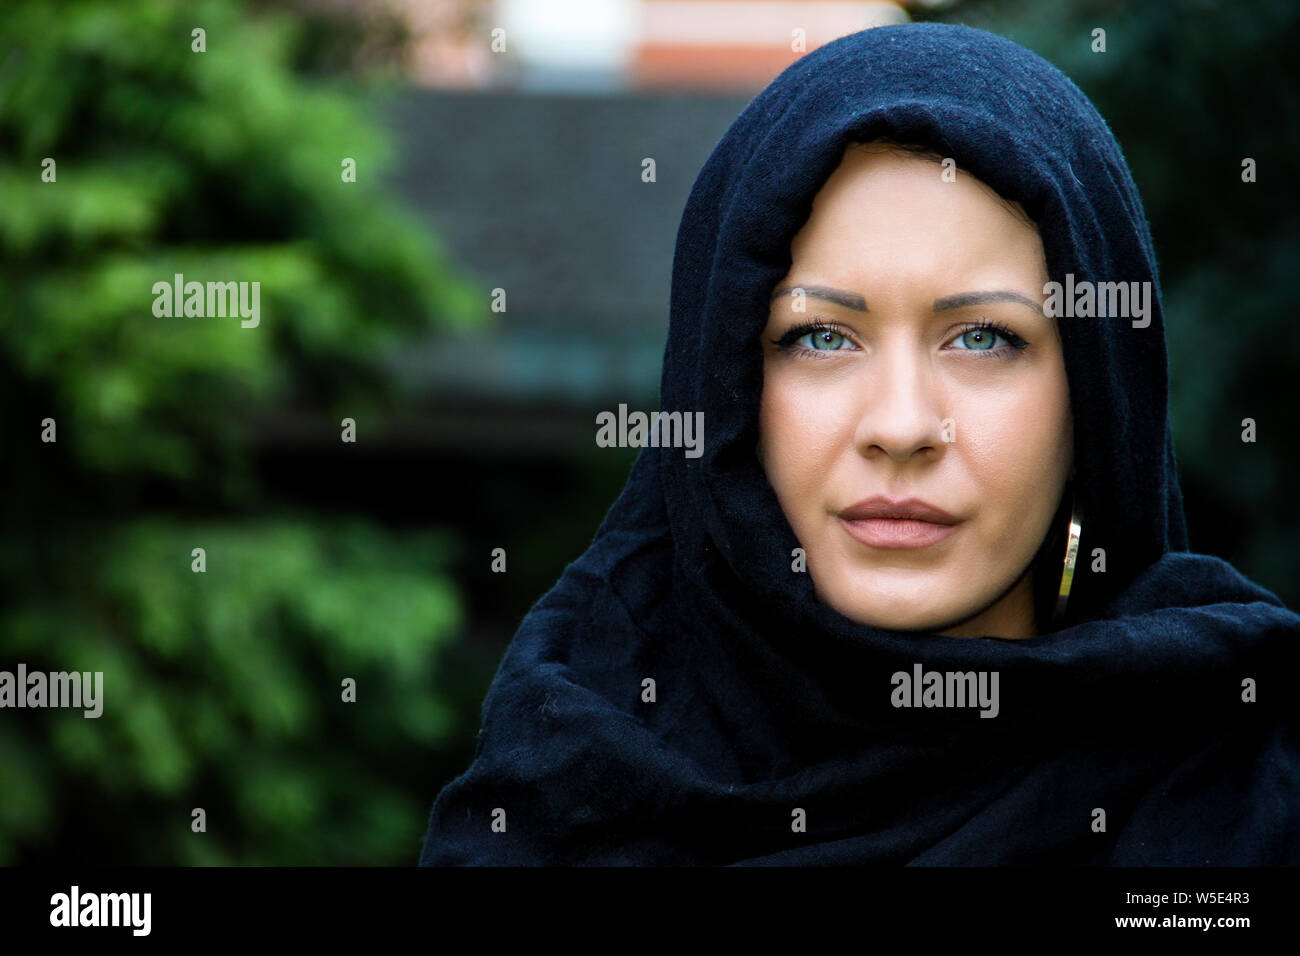 Beautiful blue eyed muslim lady posing with scarf on her head Stock Photo